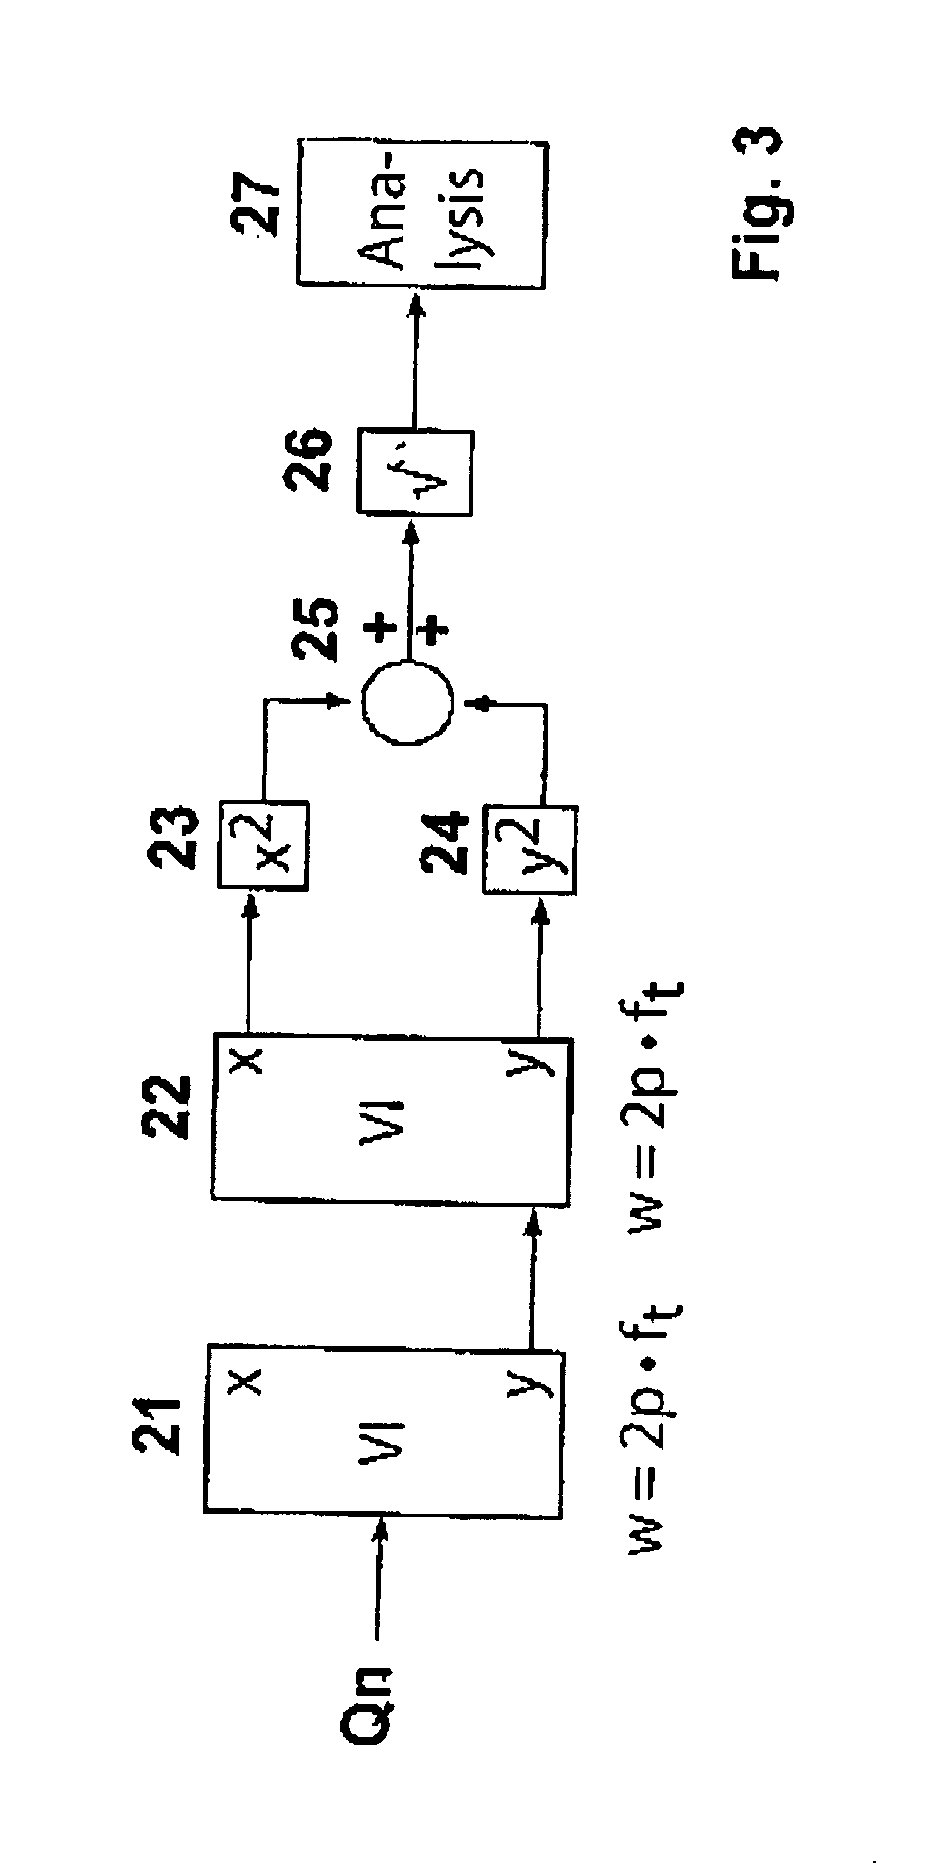 Method for detecting an isolated network